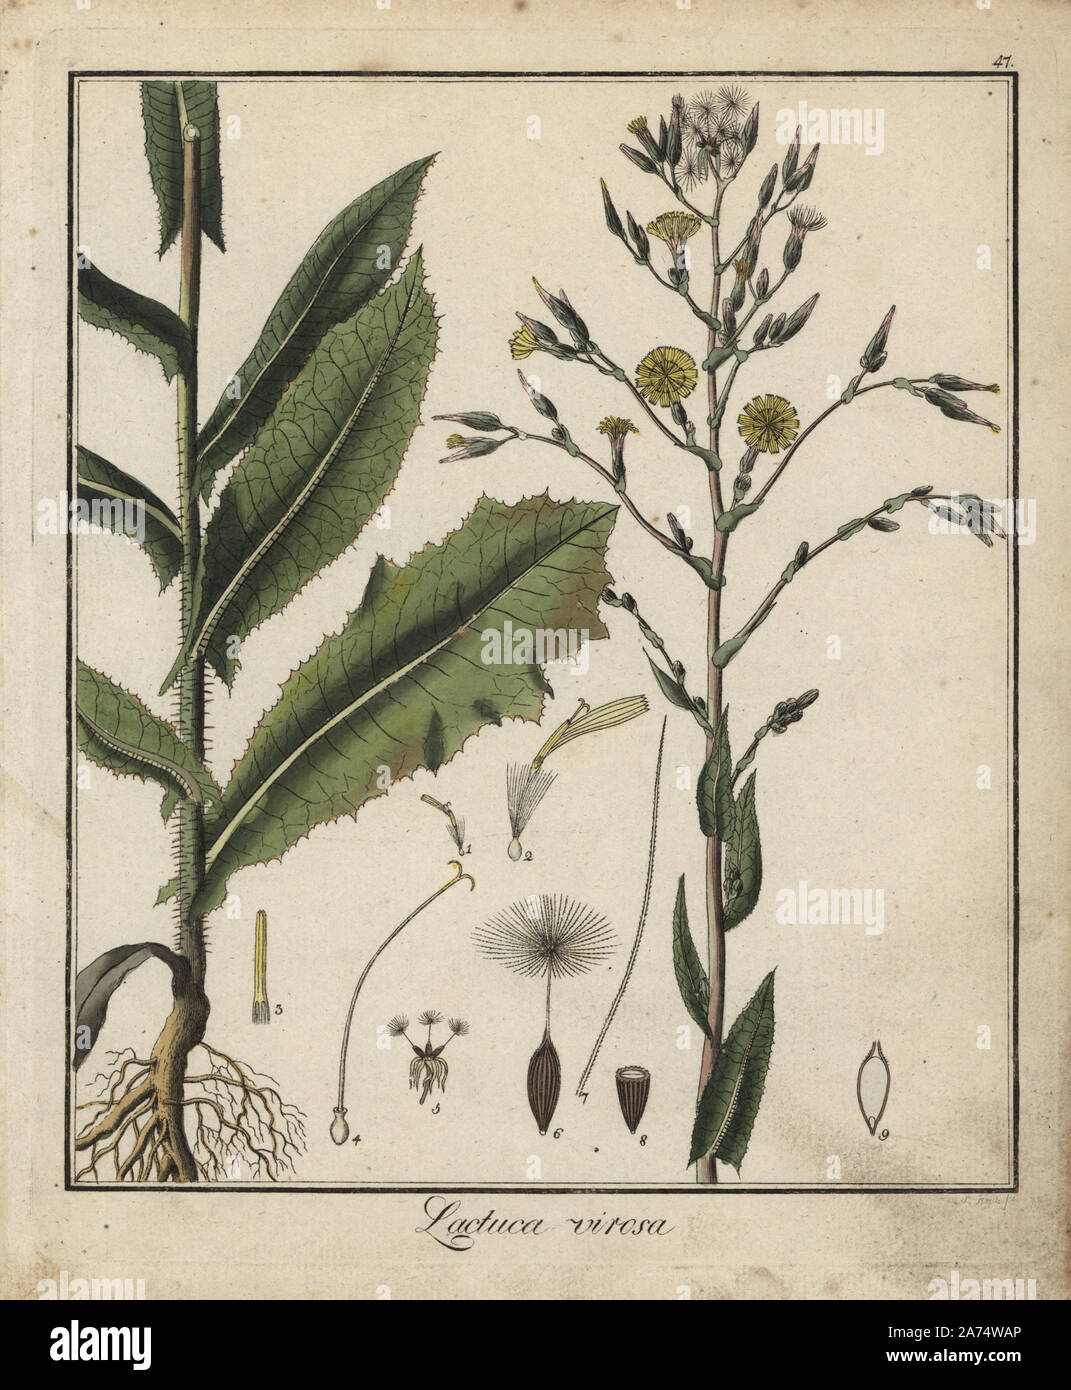 Wild lettuce, Lactuca virosa. Handcoloured copperplate engraving by P. Haas from Dr. Friedrich Gottlob Hayne's Medical Botany, Berlin, 1822. Hayne (1763-1832) was a German botanist, apothecary and professor of pharmaceutical botany at Berlin University. Stock Photo